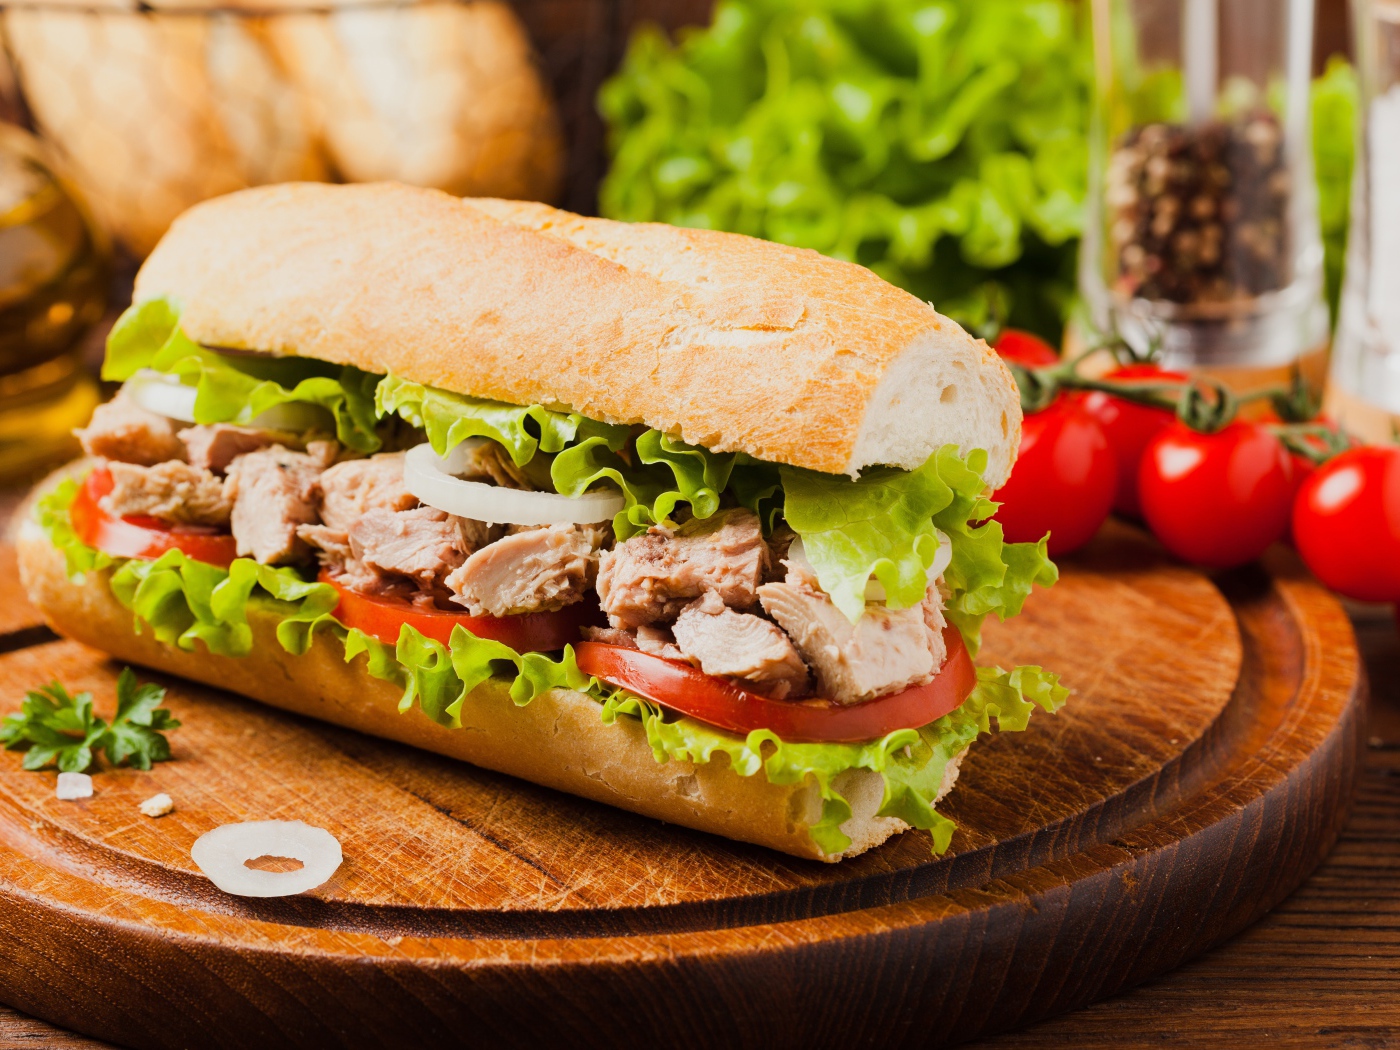 Sandwich with meat, tomatoes and lettuce